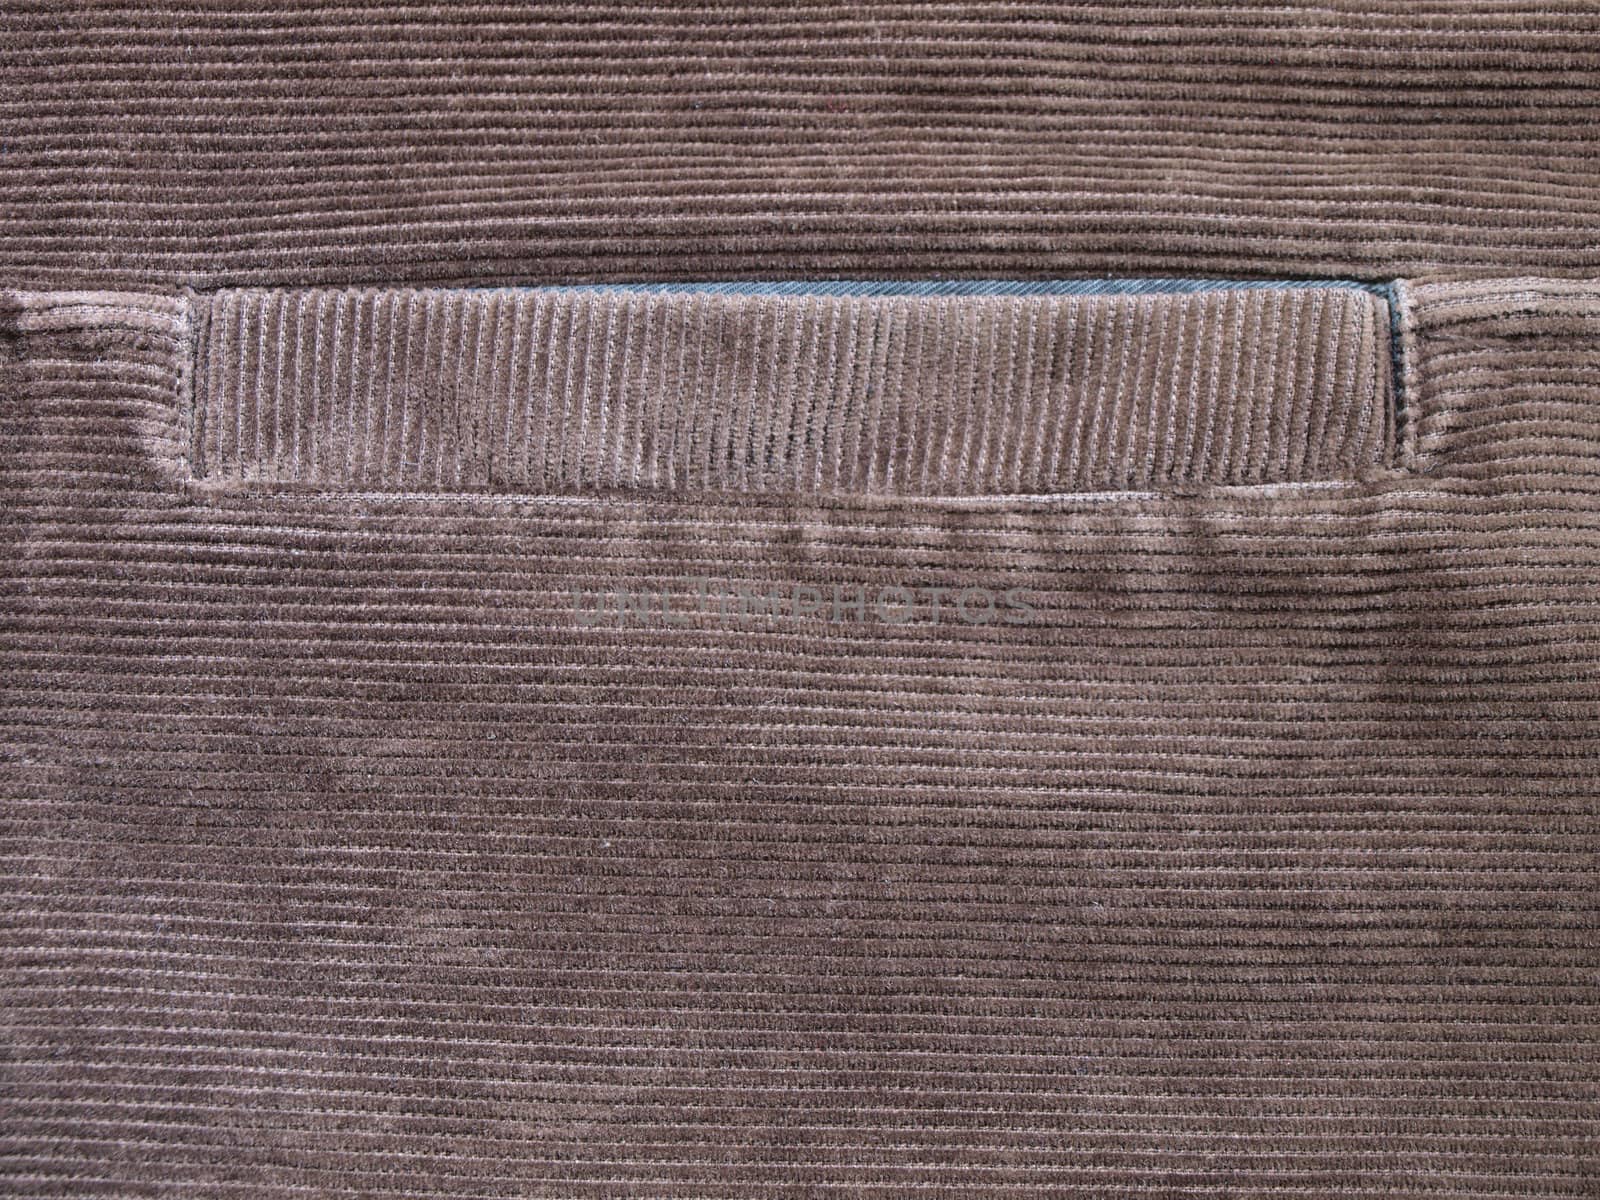 Texture of Brown corrugated fabric